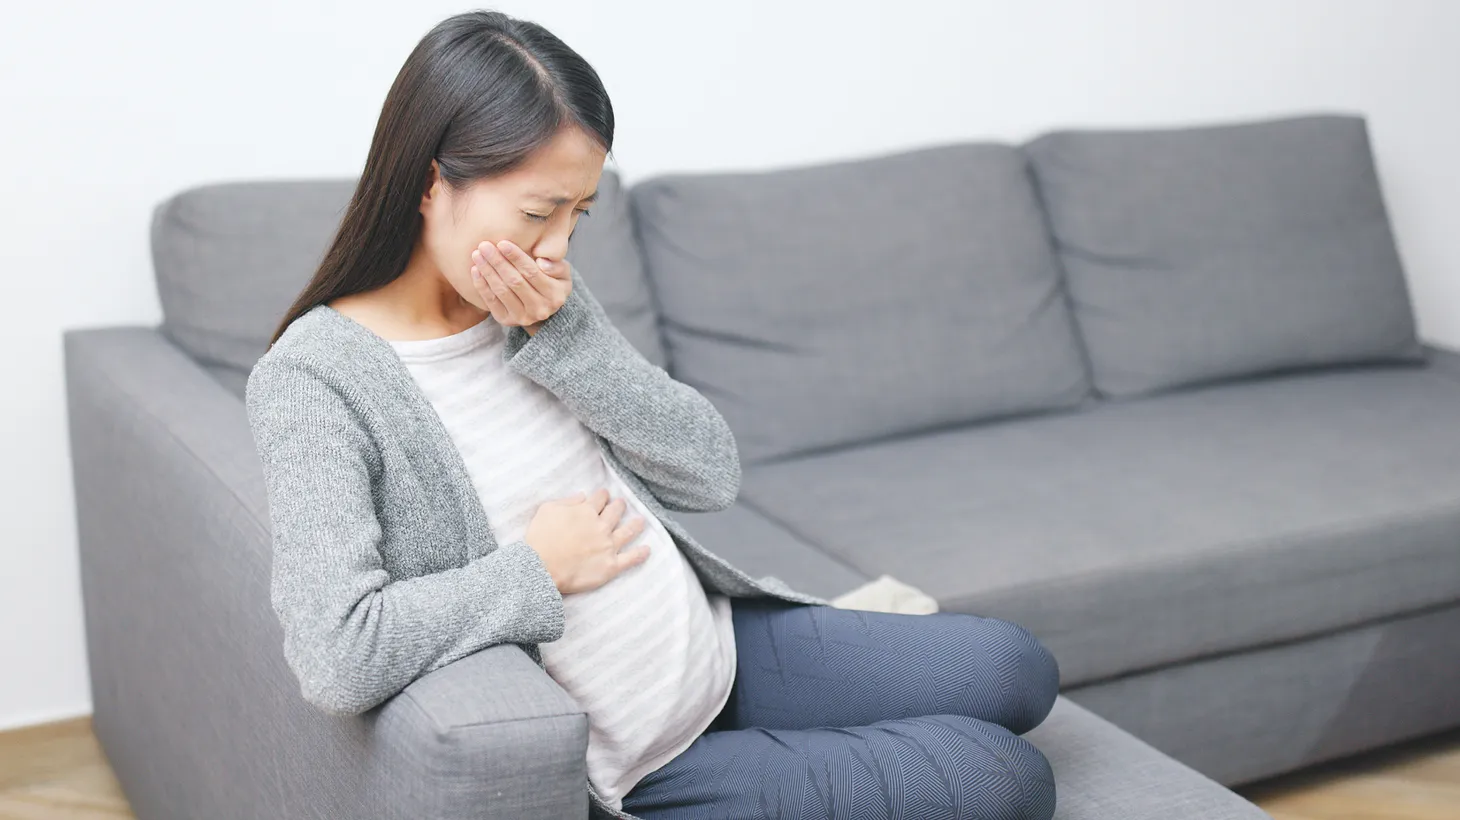 The risk factor for hyperemesis is the common nausea and vomiting hormone known as GDF15. Men and women make the hormone, and it’s often produced when the body’s in a weakened state, says geneticist Dr. Marlena Fejzo.